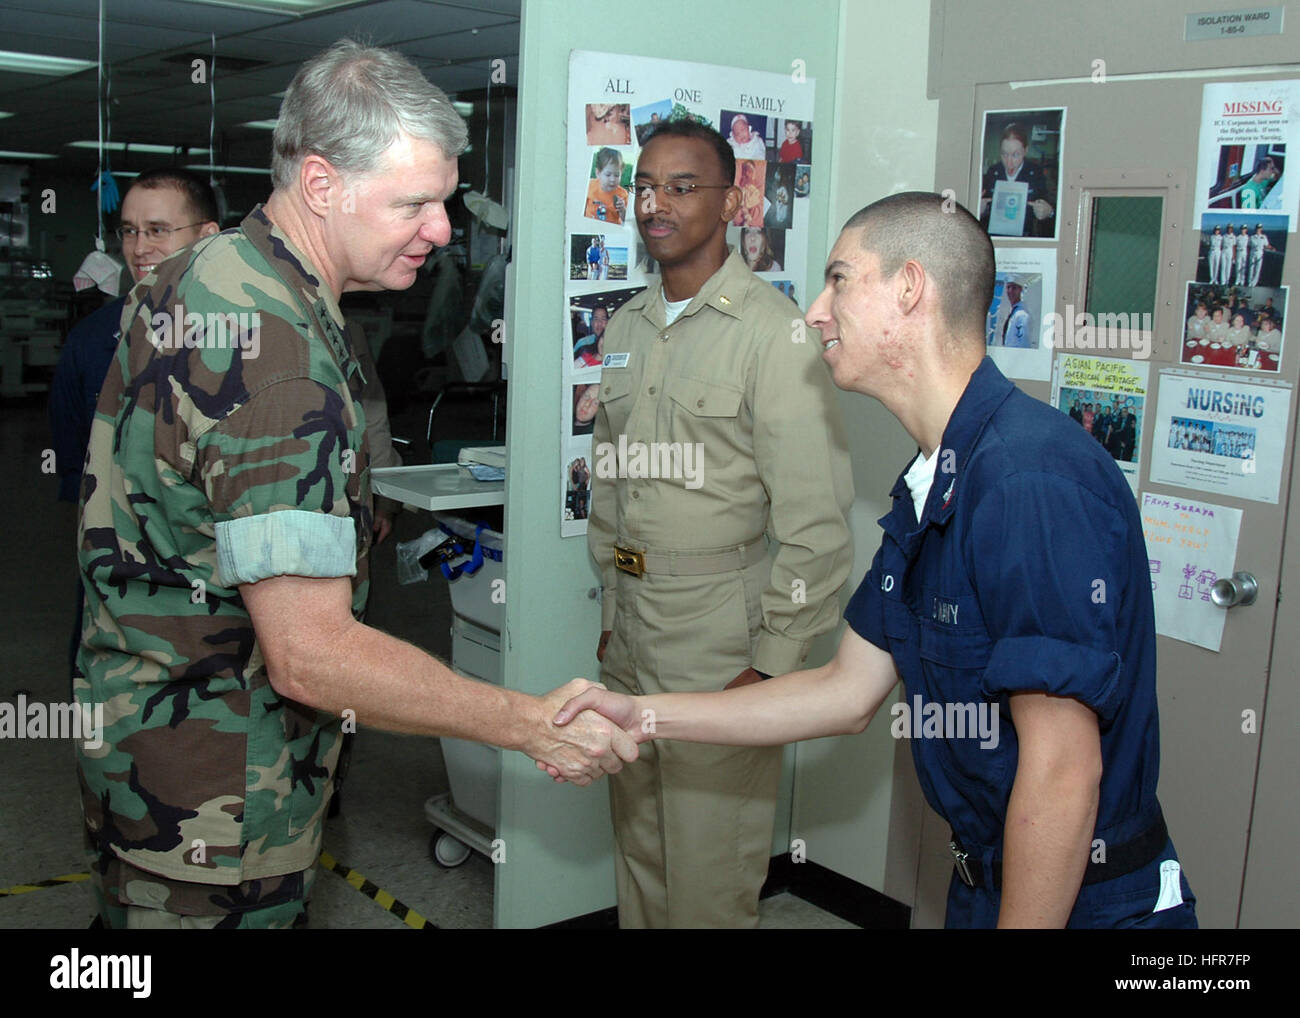 060608-N-3931M-109 Jolo, Philippines (June 8, 2006) - Commander, U.S. Pacific Fleet Adm. Gary Roughead, greets Navy Hospital Corpsman 3rd Class Duane Sedillo, a Pueblo, Colo., native of the Medical Treatment Facility aboard the U.S. Military Sealift Command (MSC) Hospital ship USNS Mercy (T-AH 19), during a tour while the ship visits the city on a scheduled humanitarian mission. Mercy is on a five-month humanitarian assistance deployment to South and Southeast Asia, and the Pacific Islands. Mercy is uniquely capable of supporting medical and humanitarian assistance needs and is configured with Stock Photo